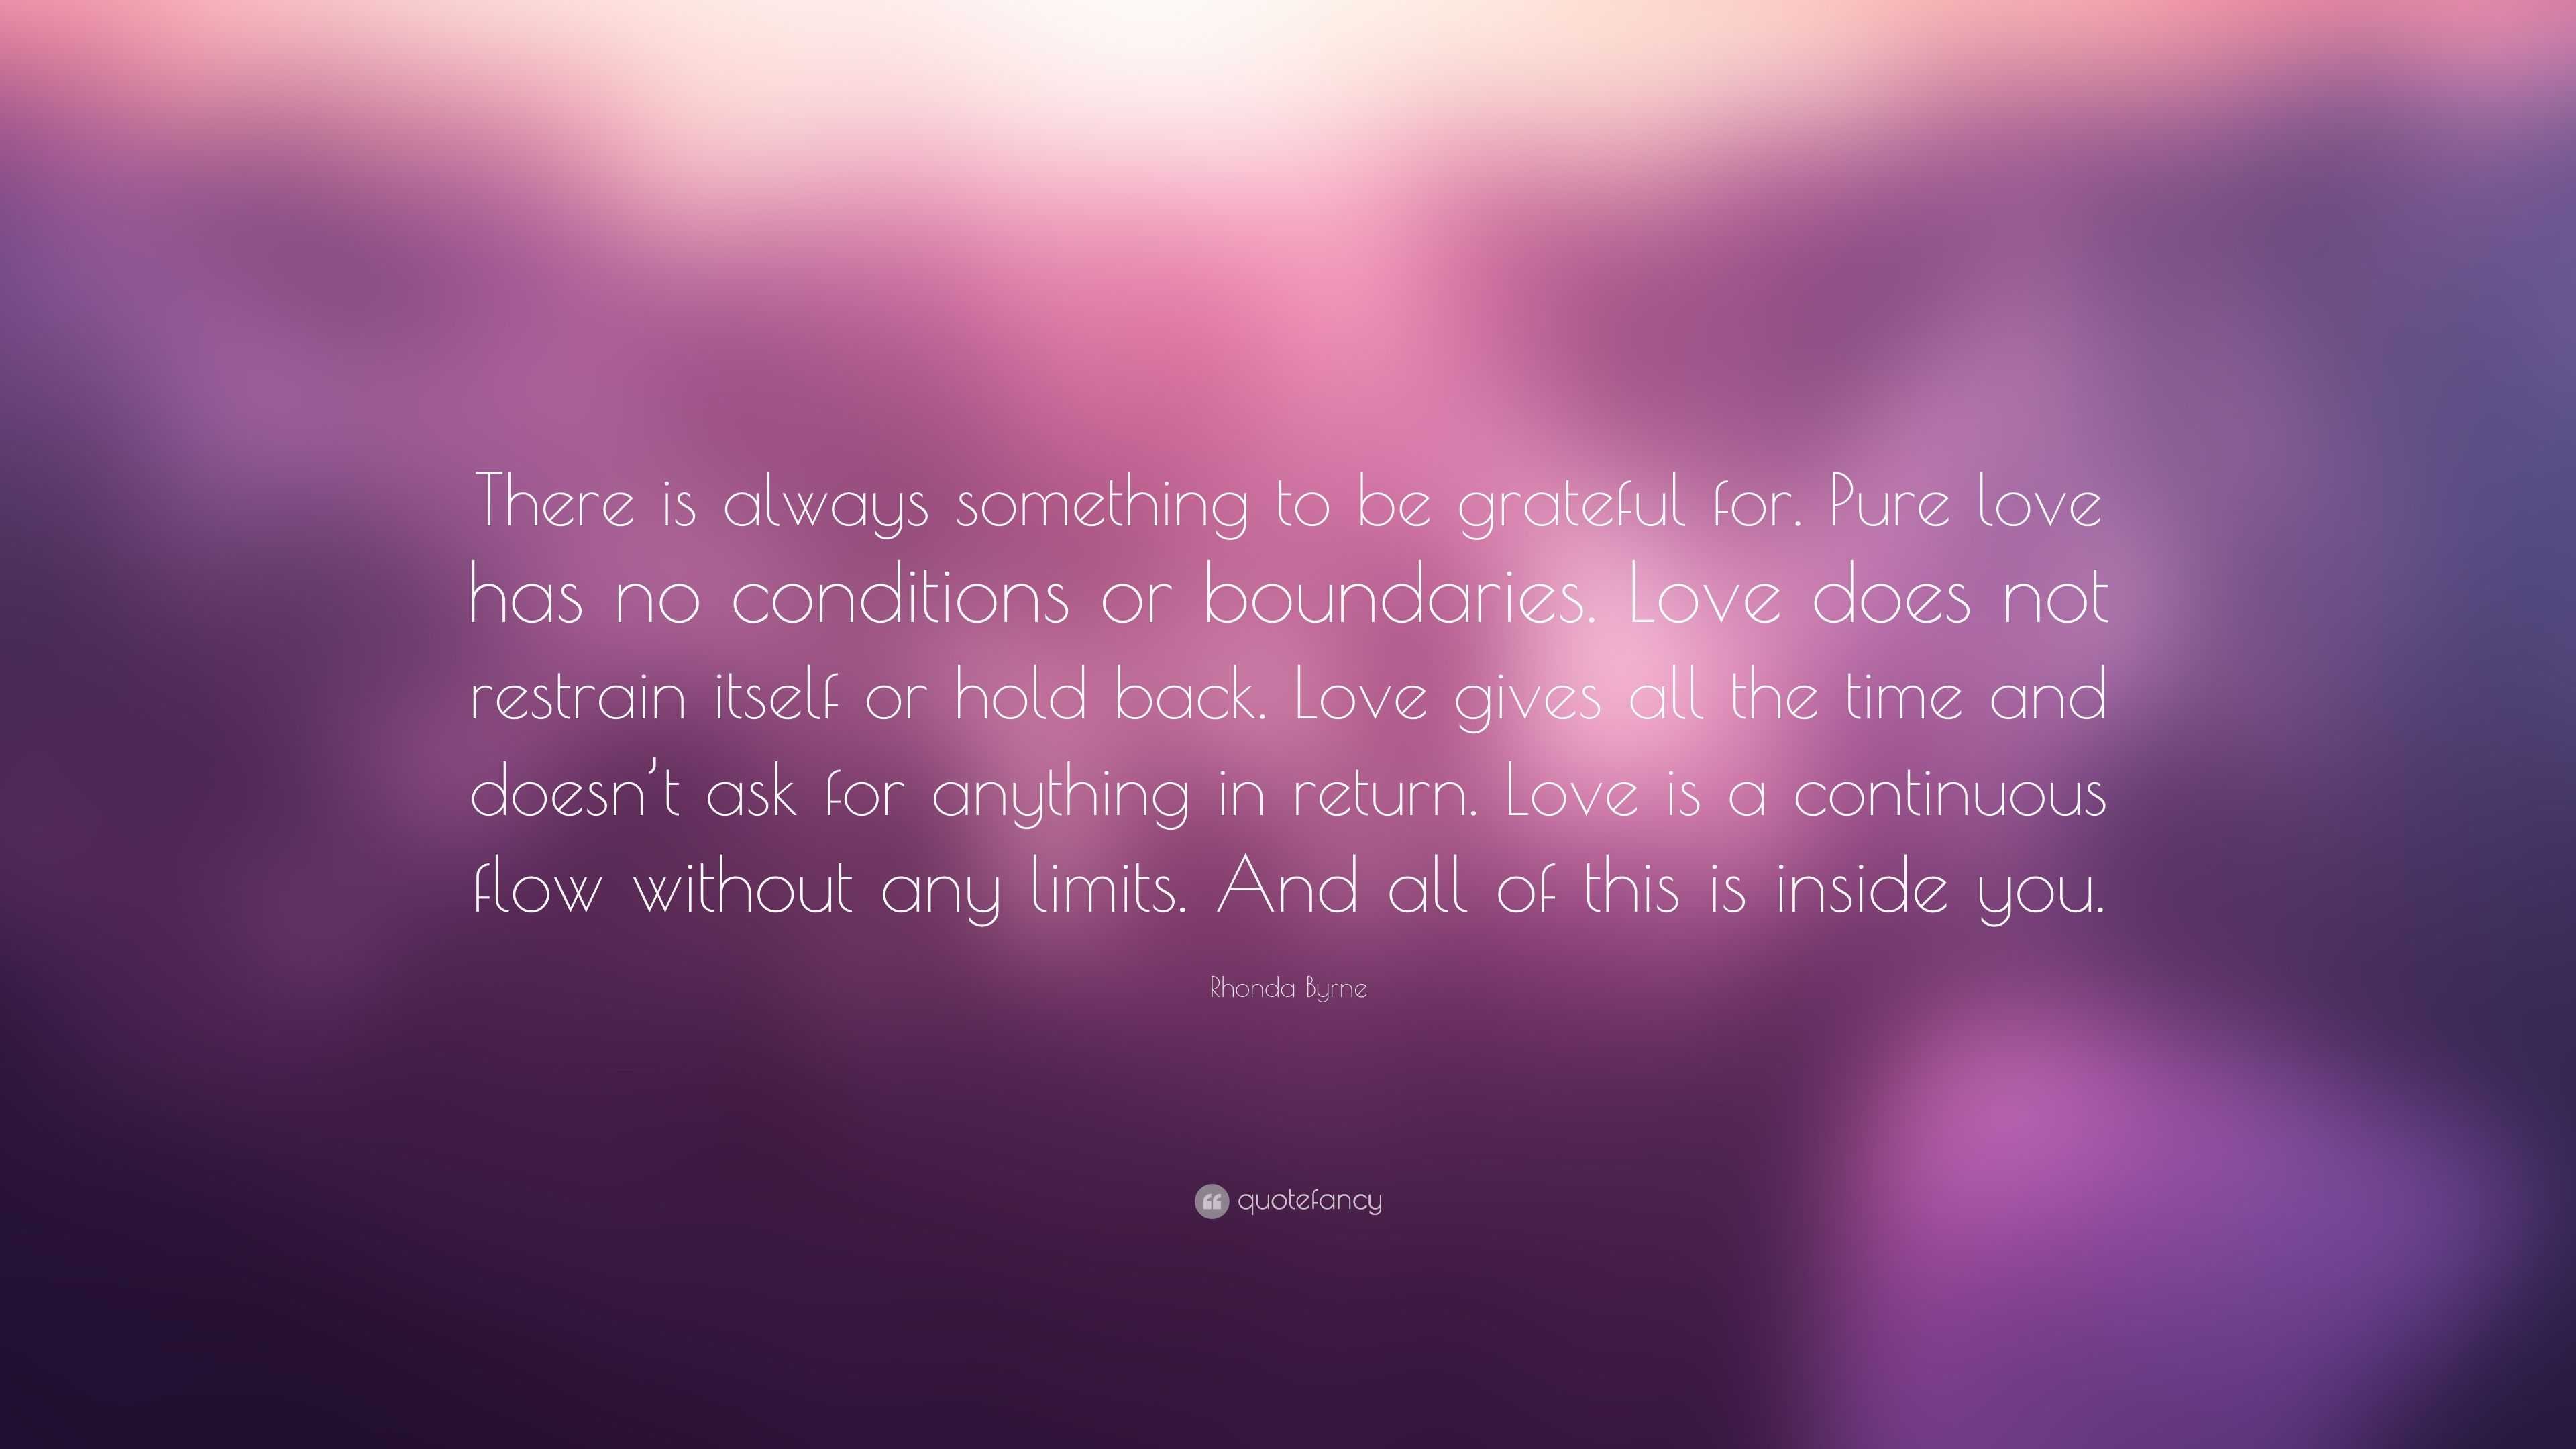 Rhonda Byrne Quote: “There is always something to be grateful for. Pure ...